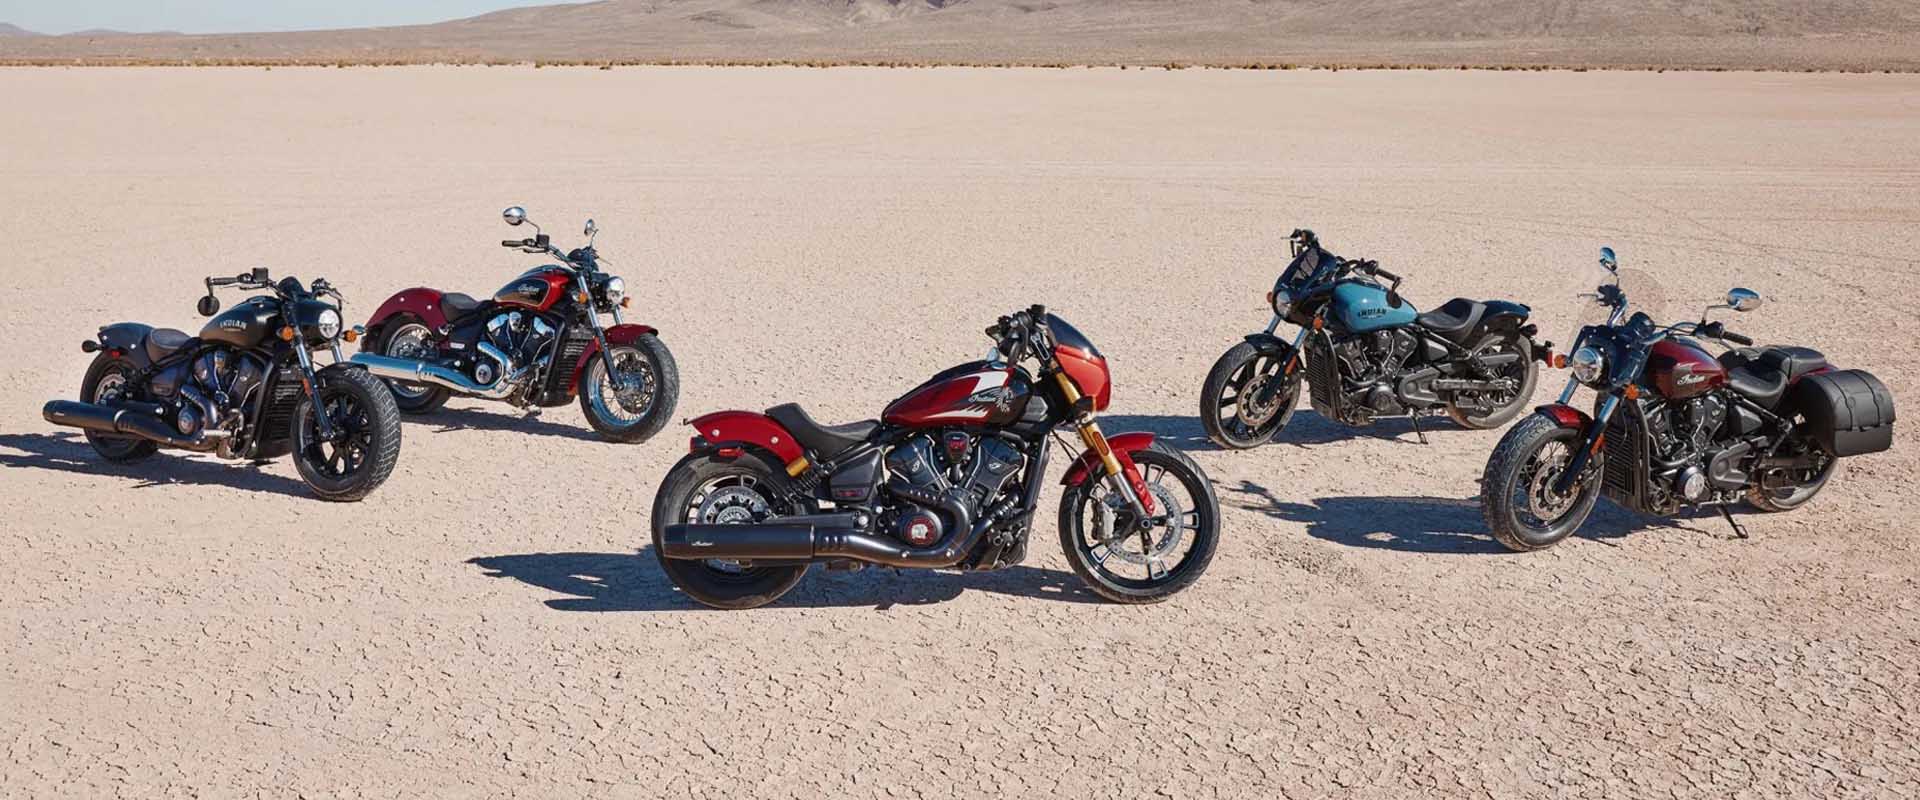 The All-New Indian Scout Family